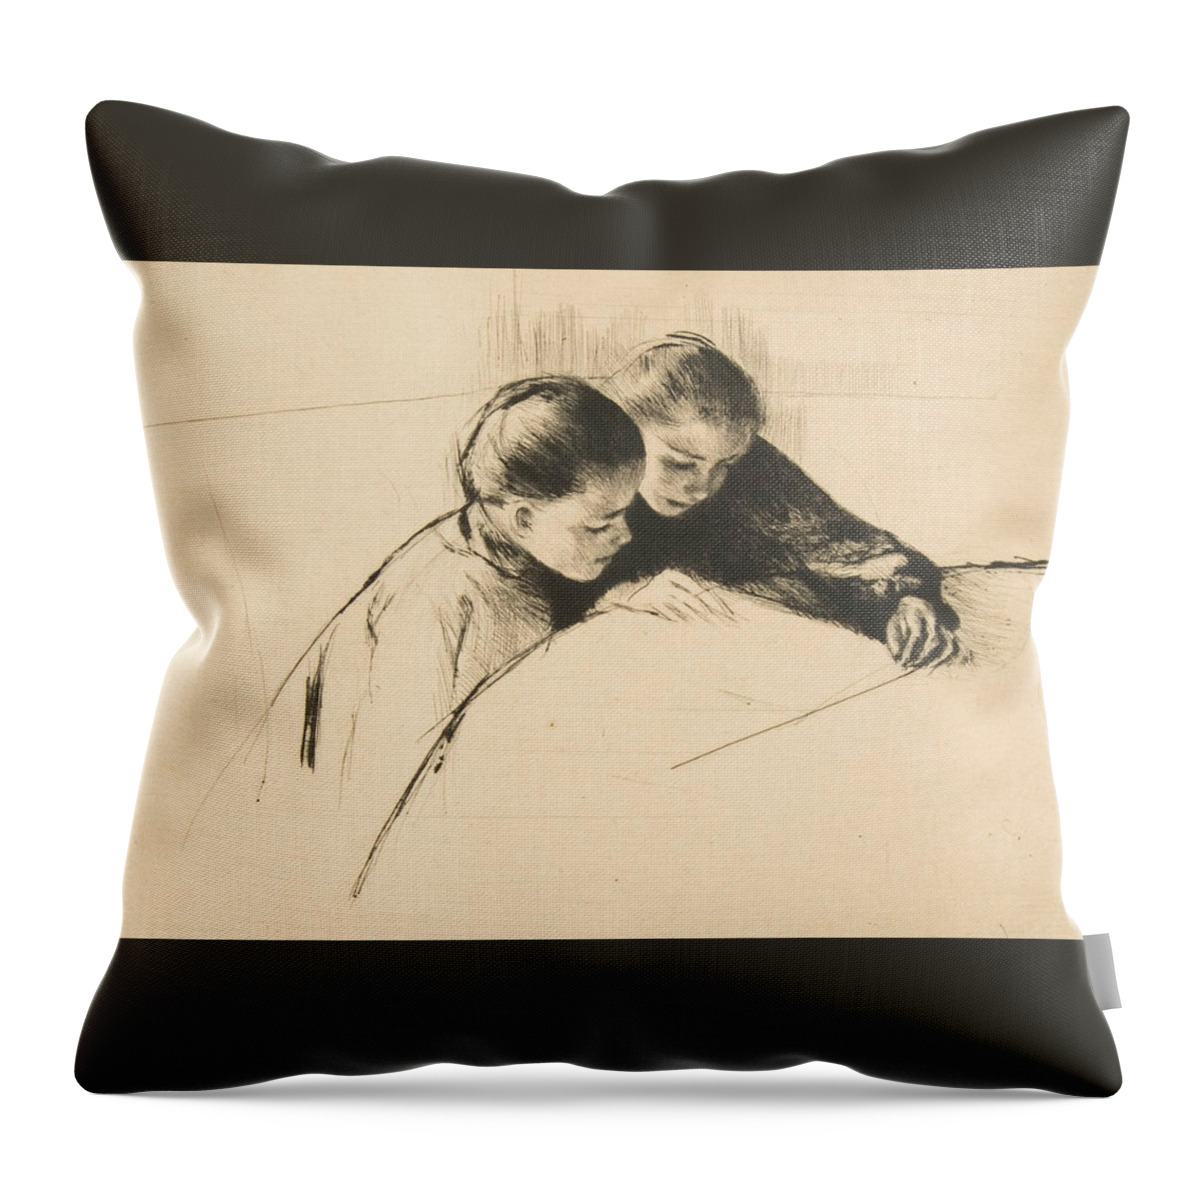 American Art Throw Pillow featuring the relief The Map by Mary Cassatt